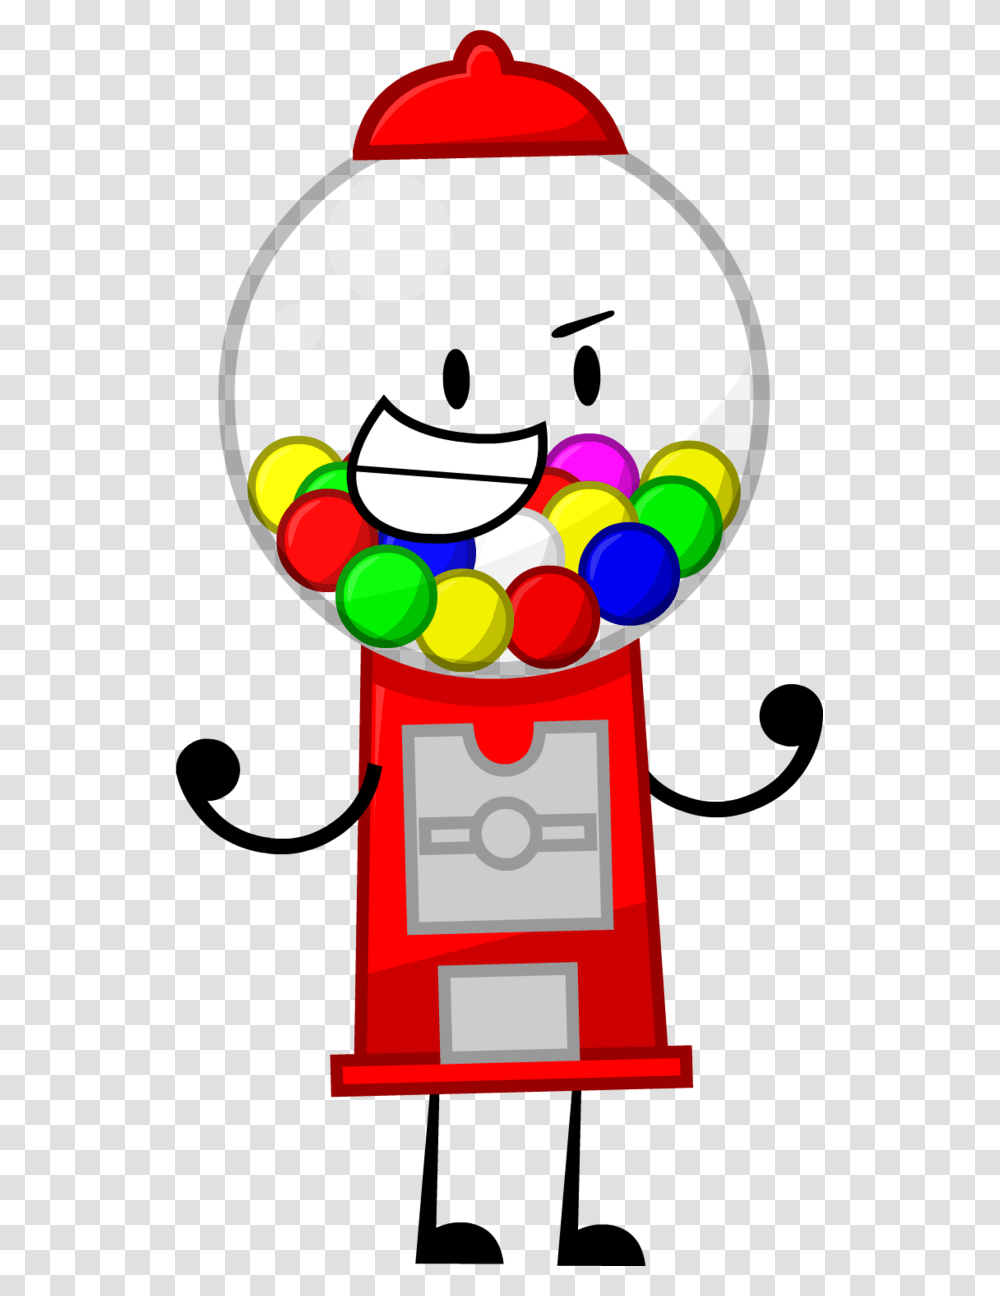 Library Gumball Machine Clipart At Getdrawings Gumball Machines Clip Art, Sweets, Food, Crowd, Snowman Transparent Png